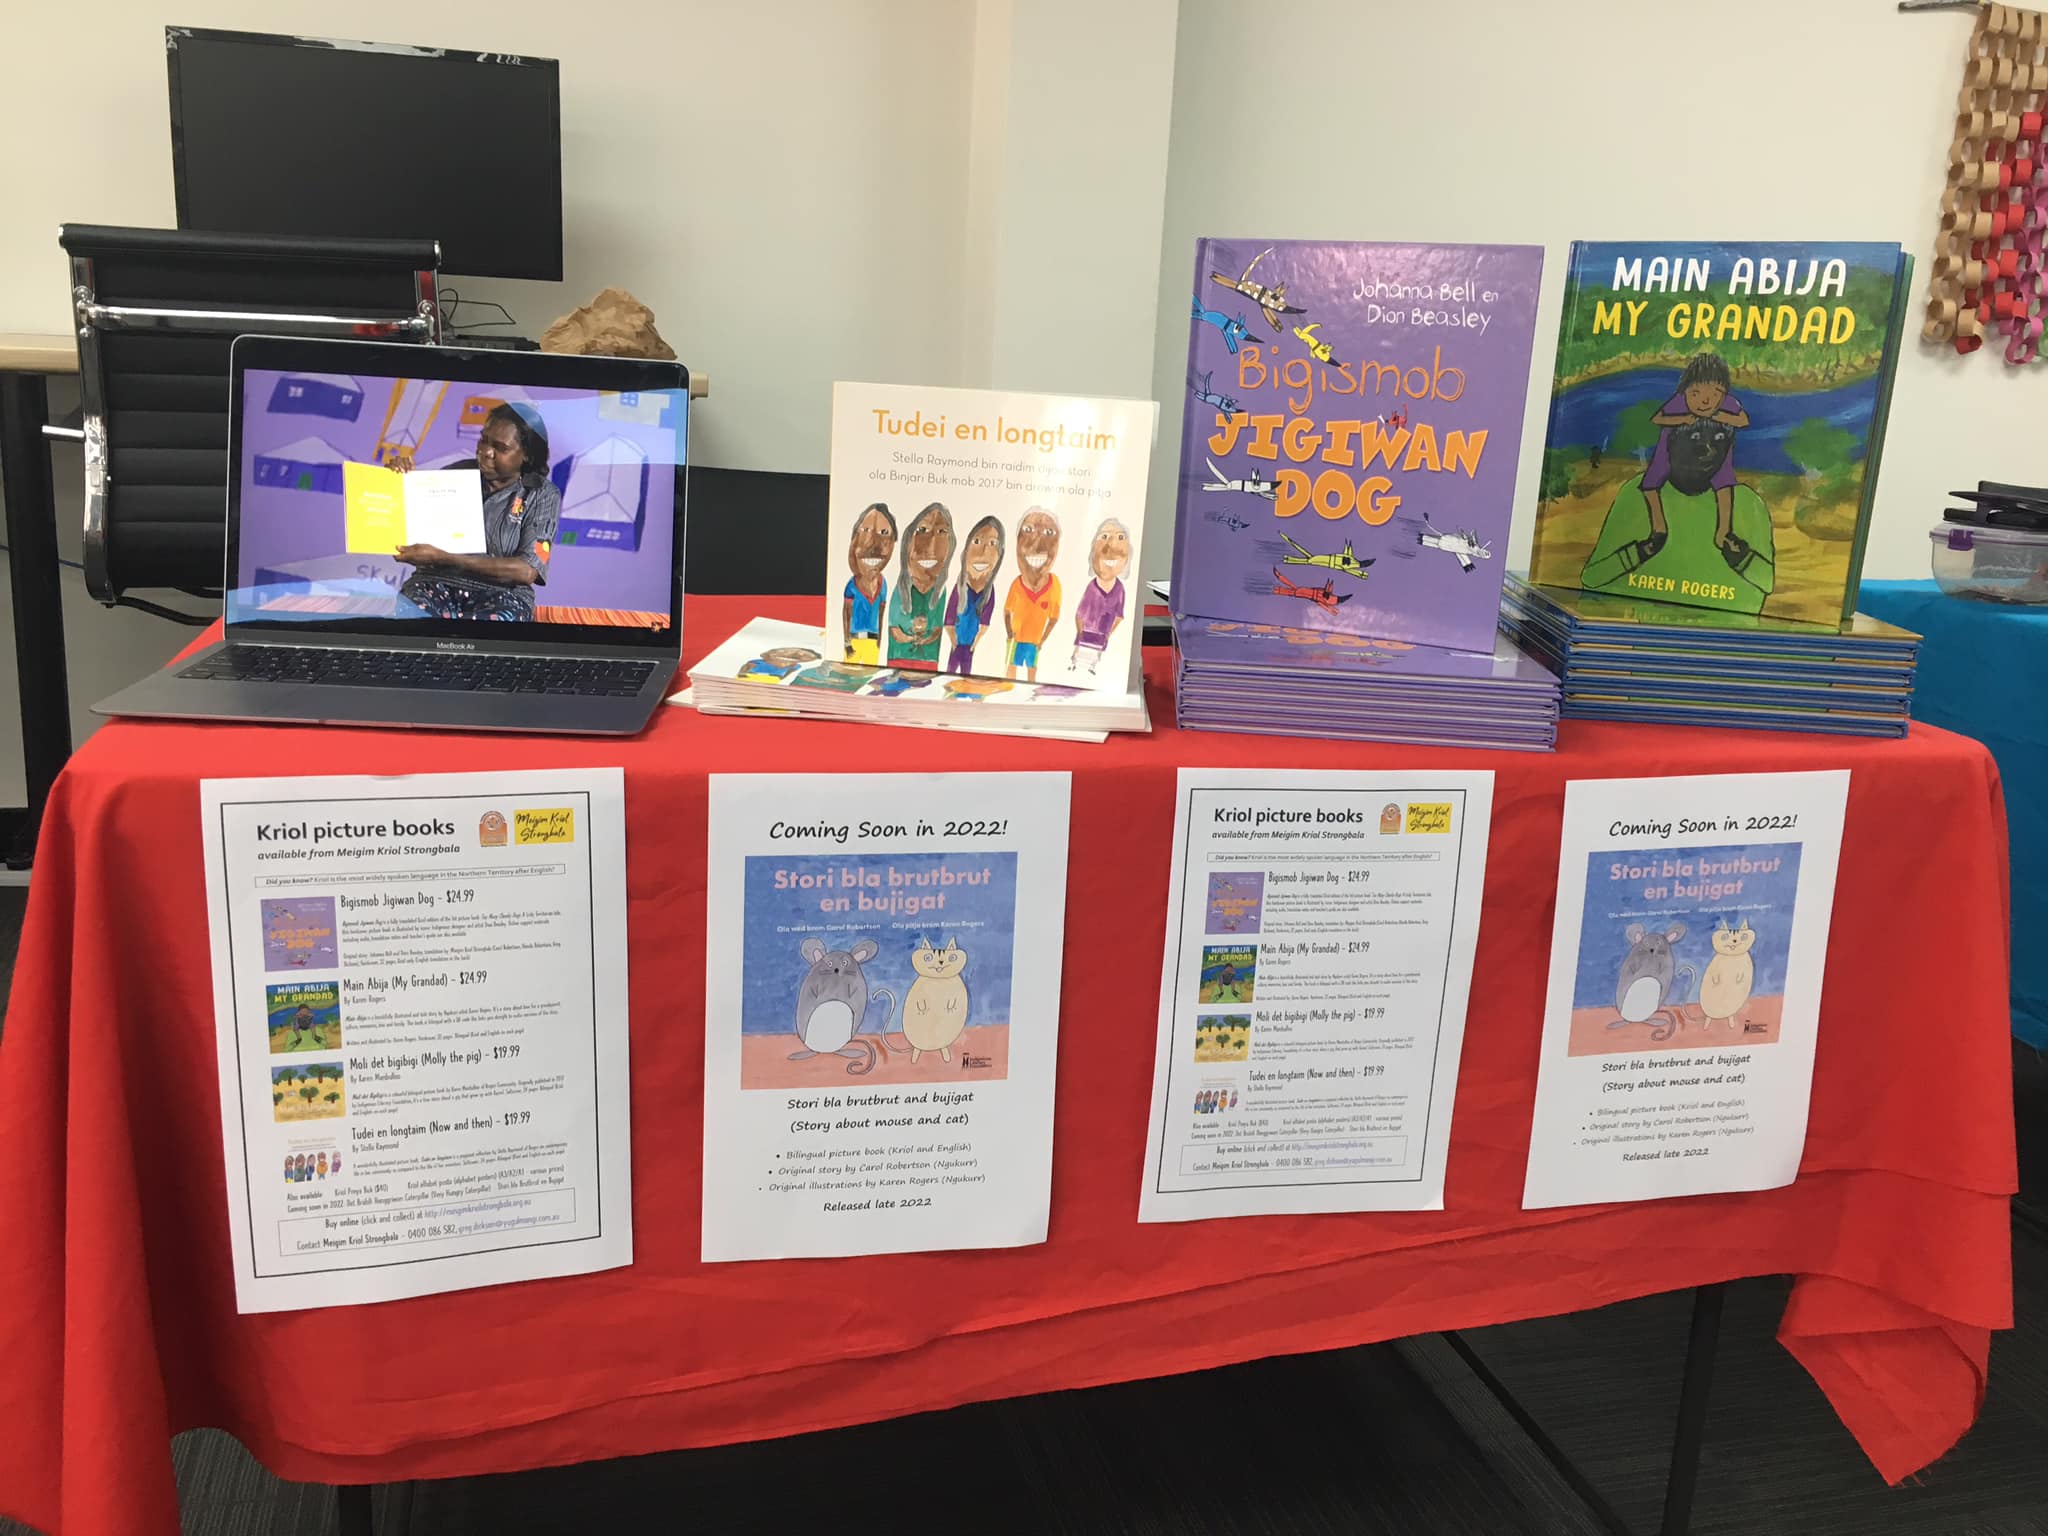 A collection of Kriol children's books on a table